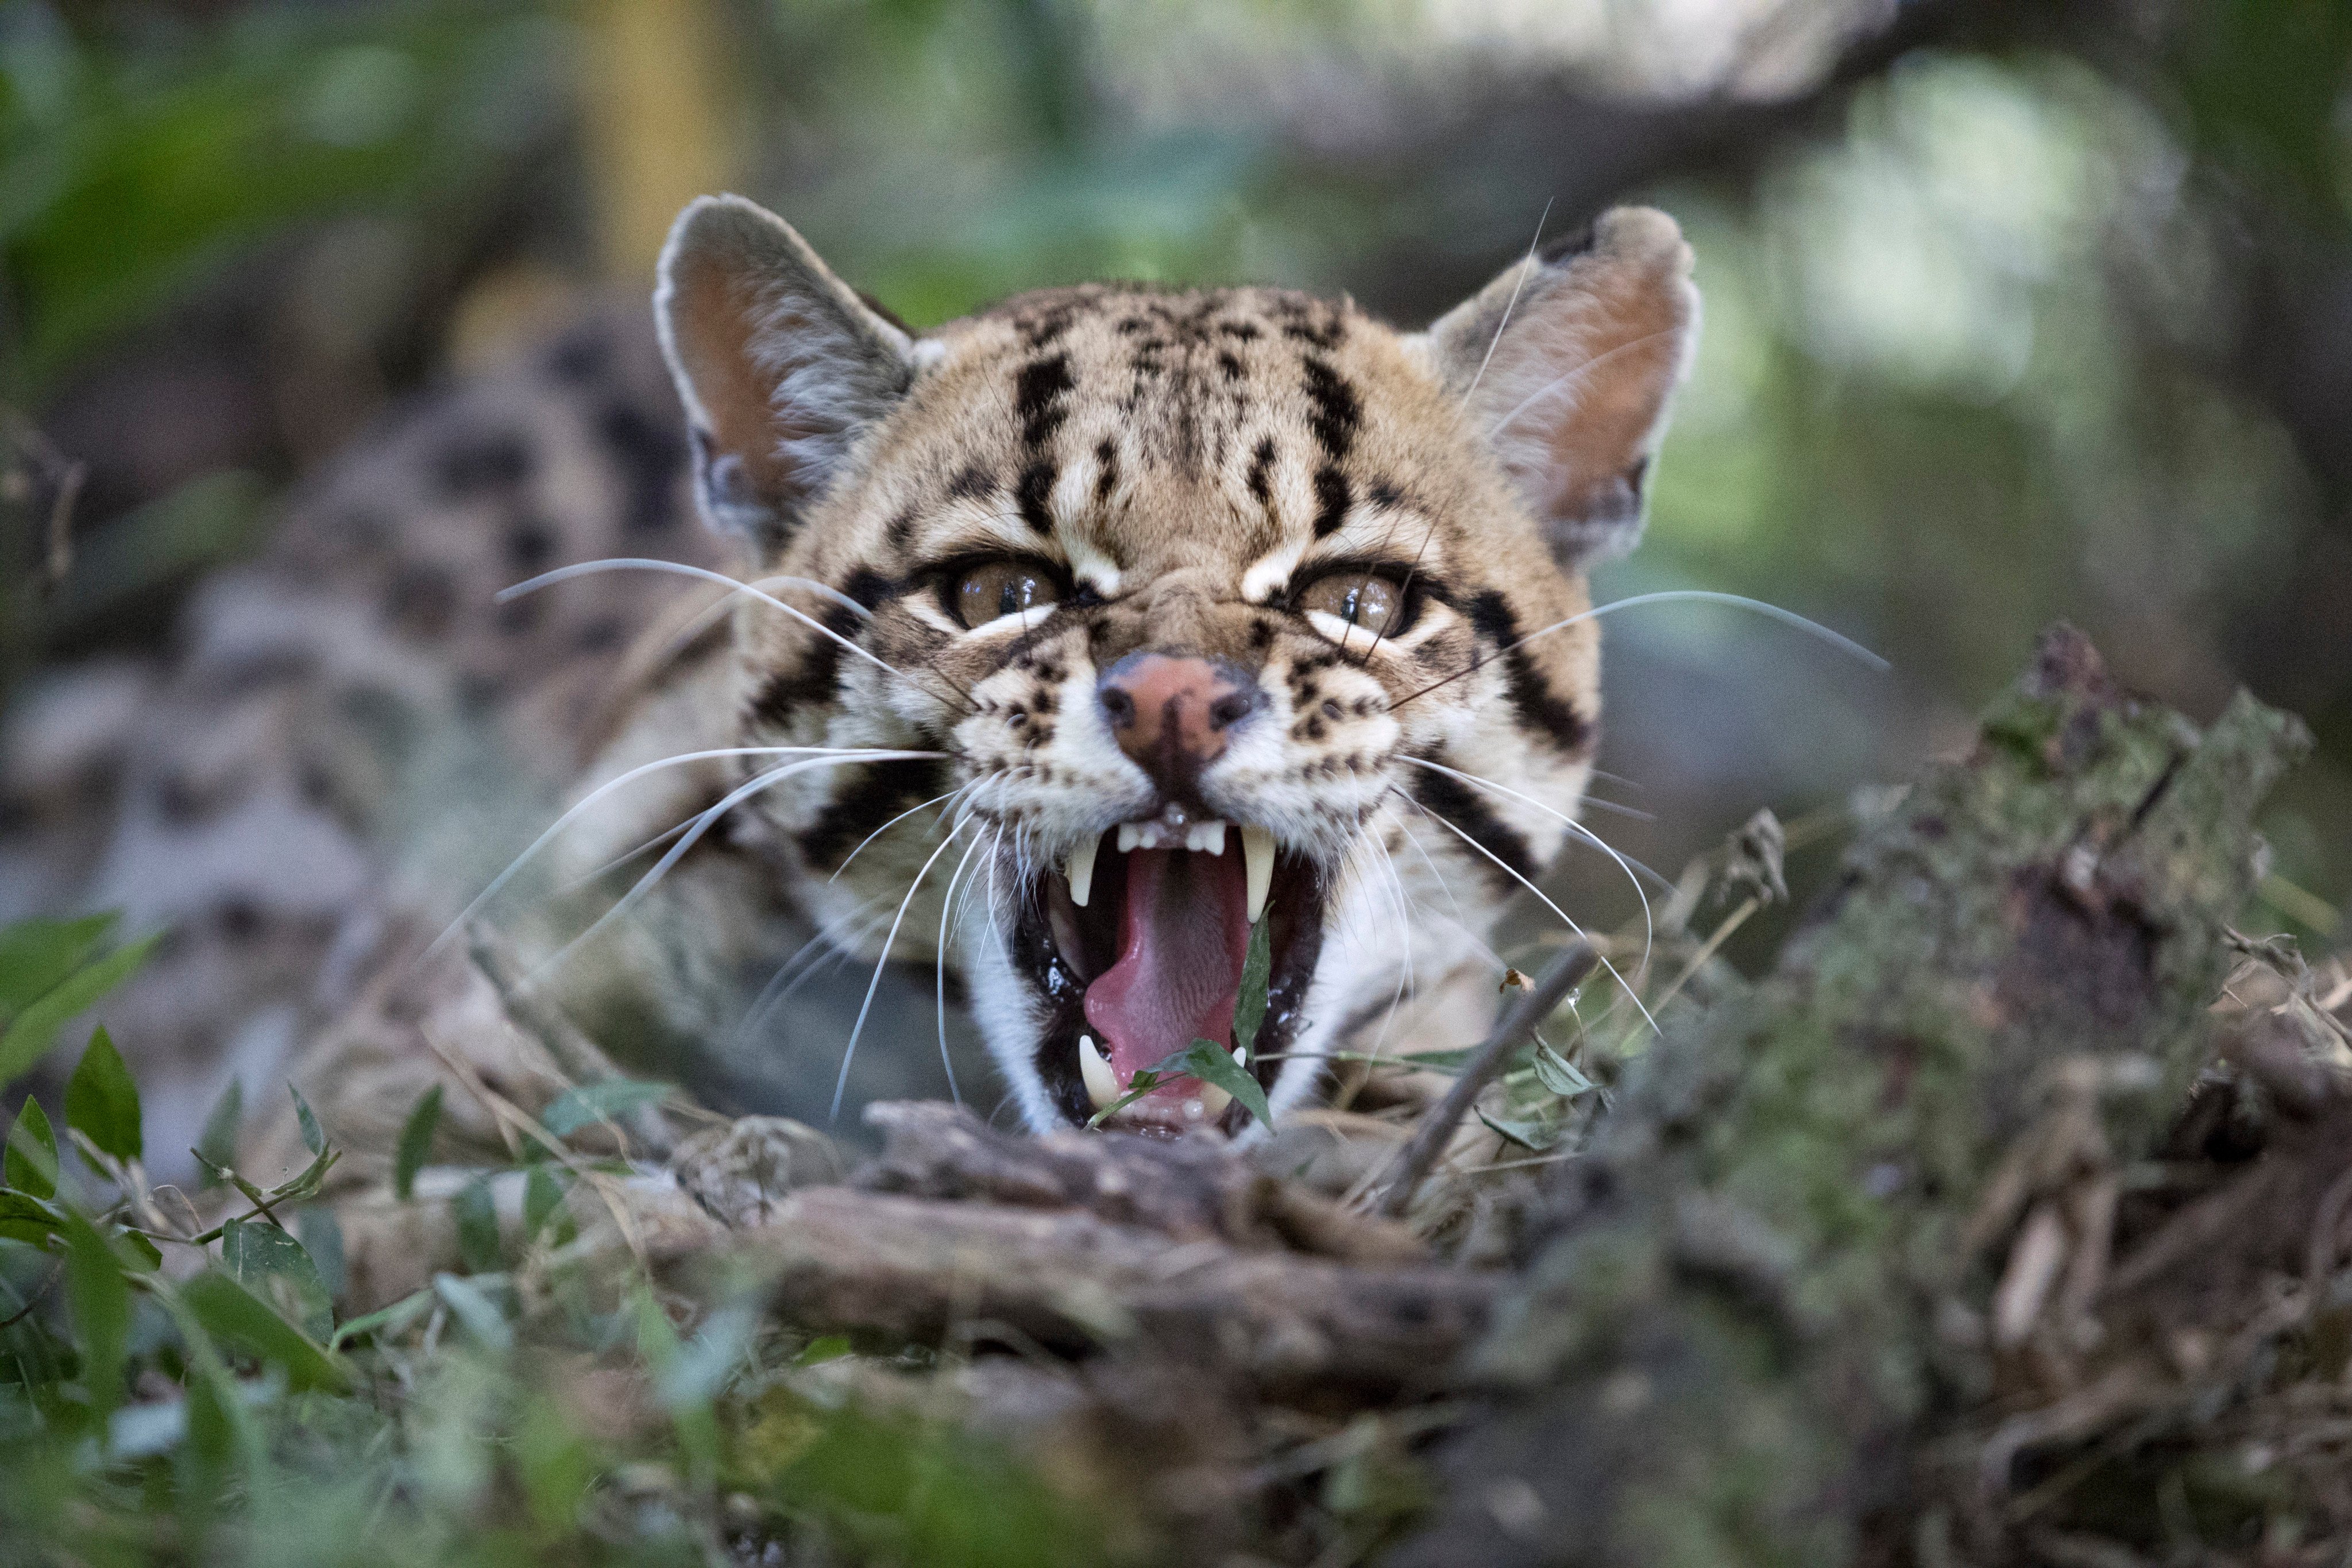 The ocelot is one of many mammal species found in the Ecuadorean cloud forest. Photo: Daniel Allen